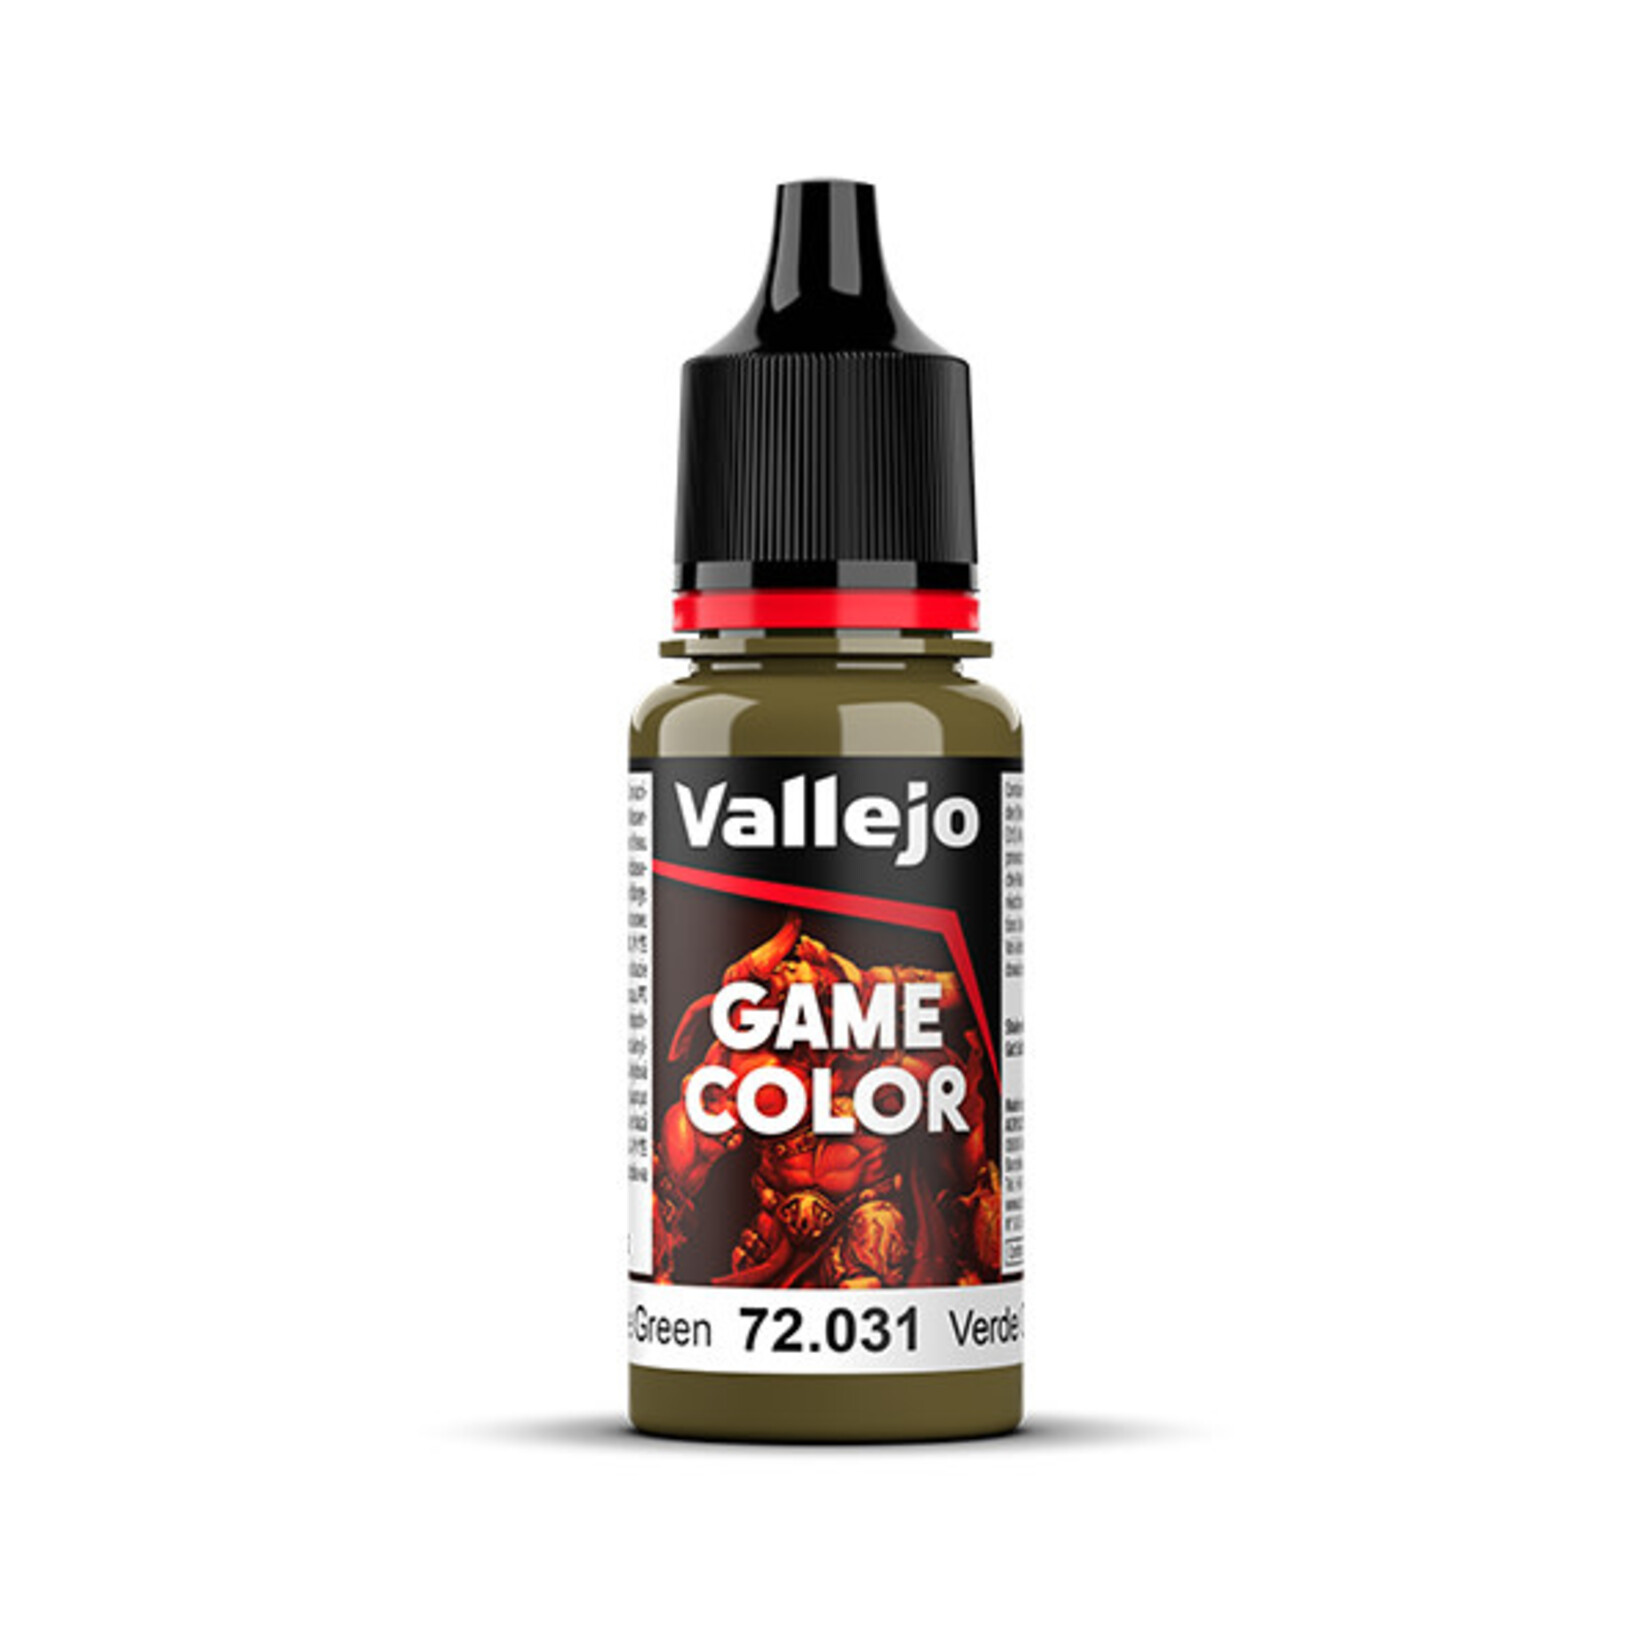 Vallejo Game Color Camouflage Green